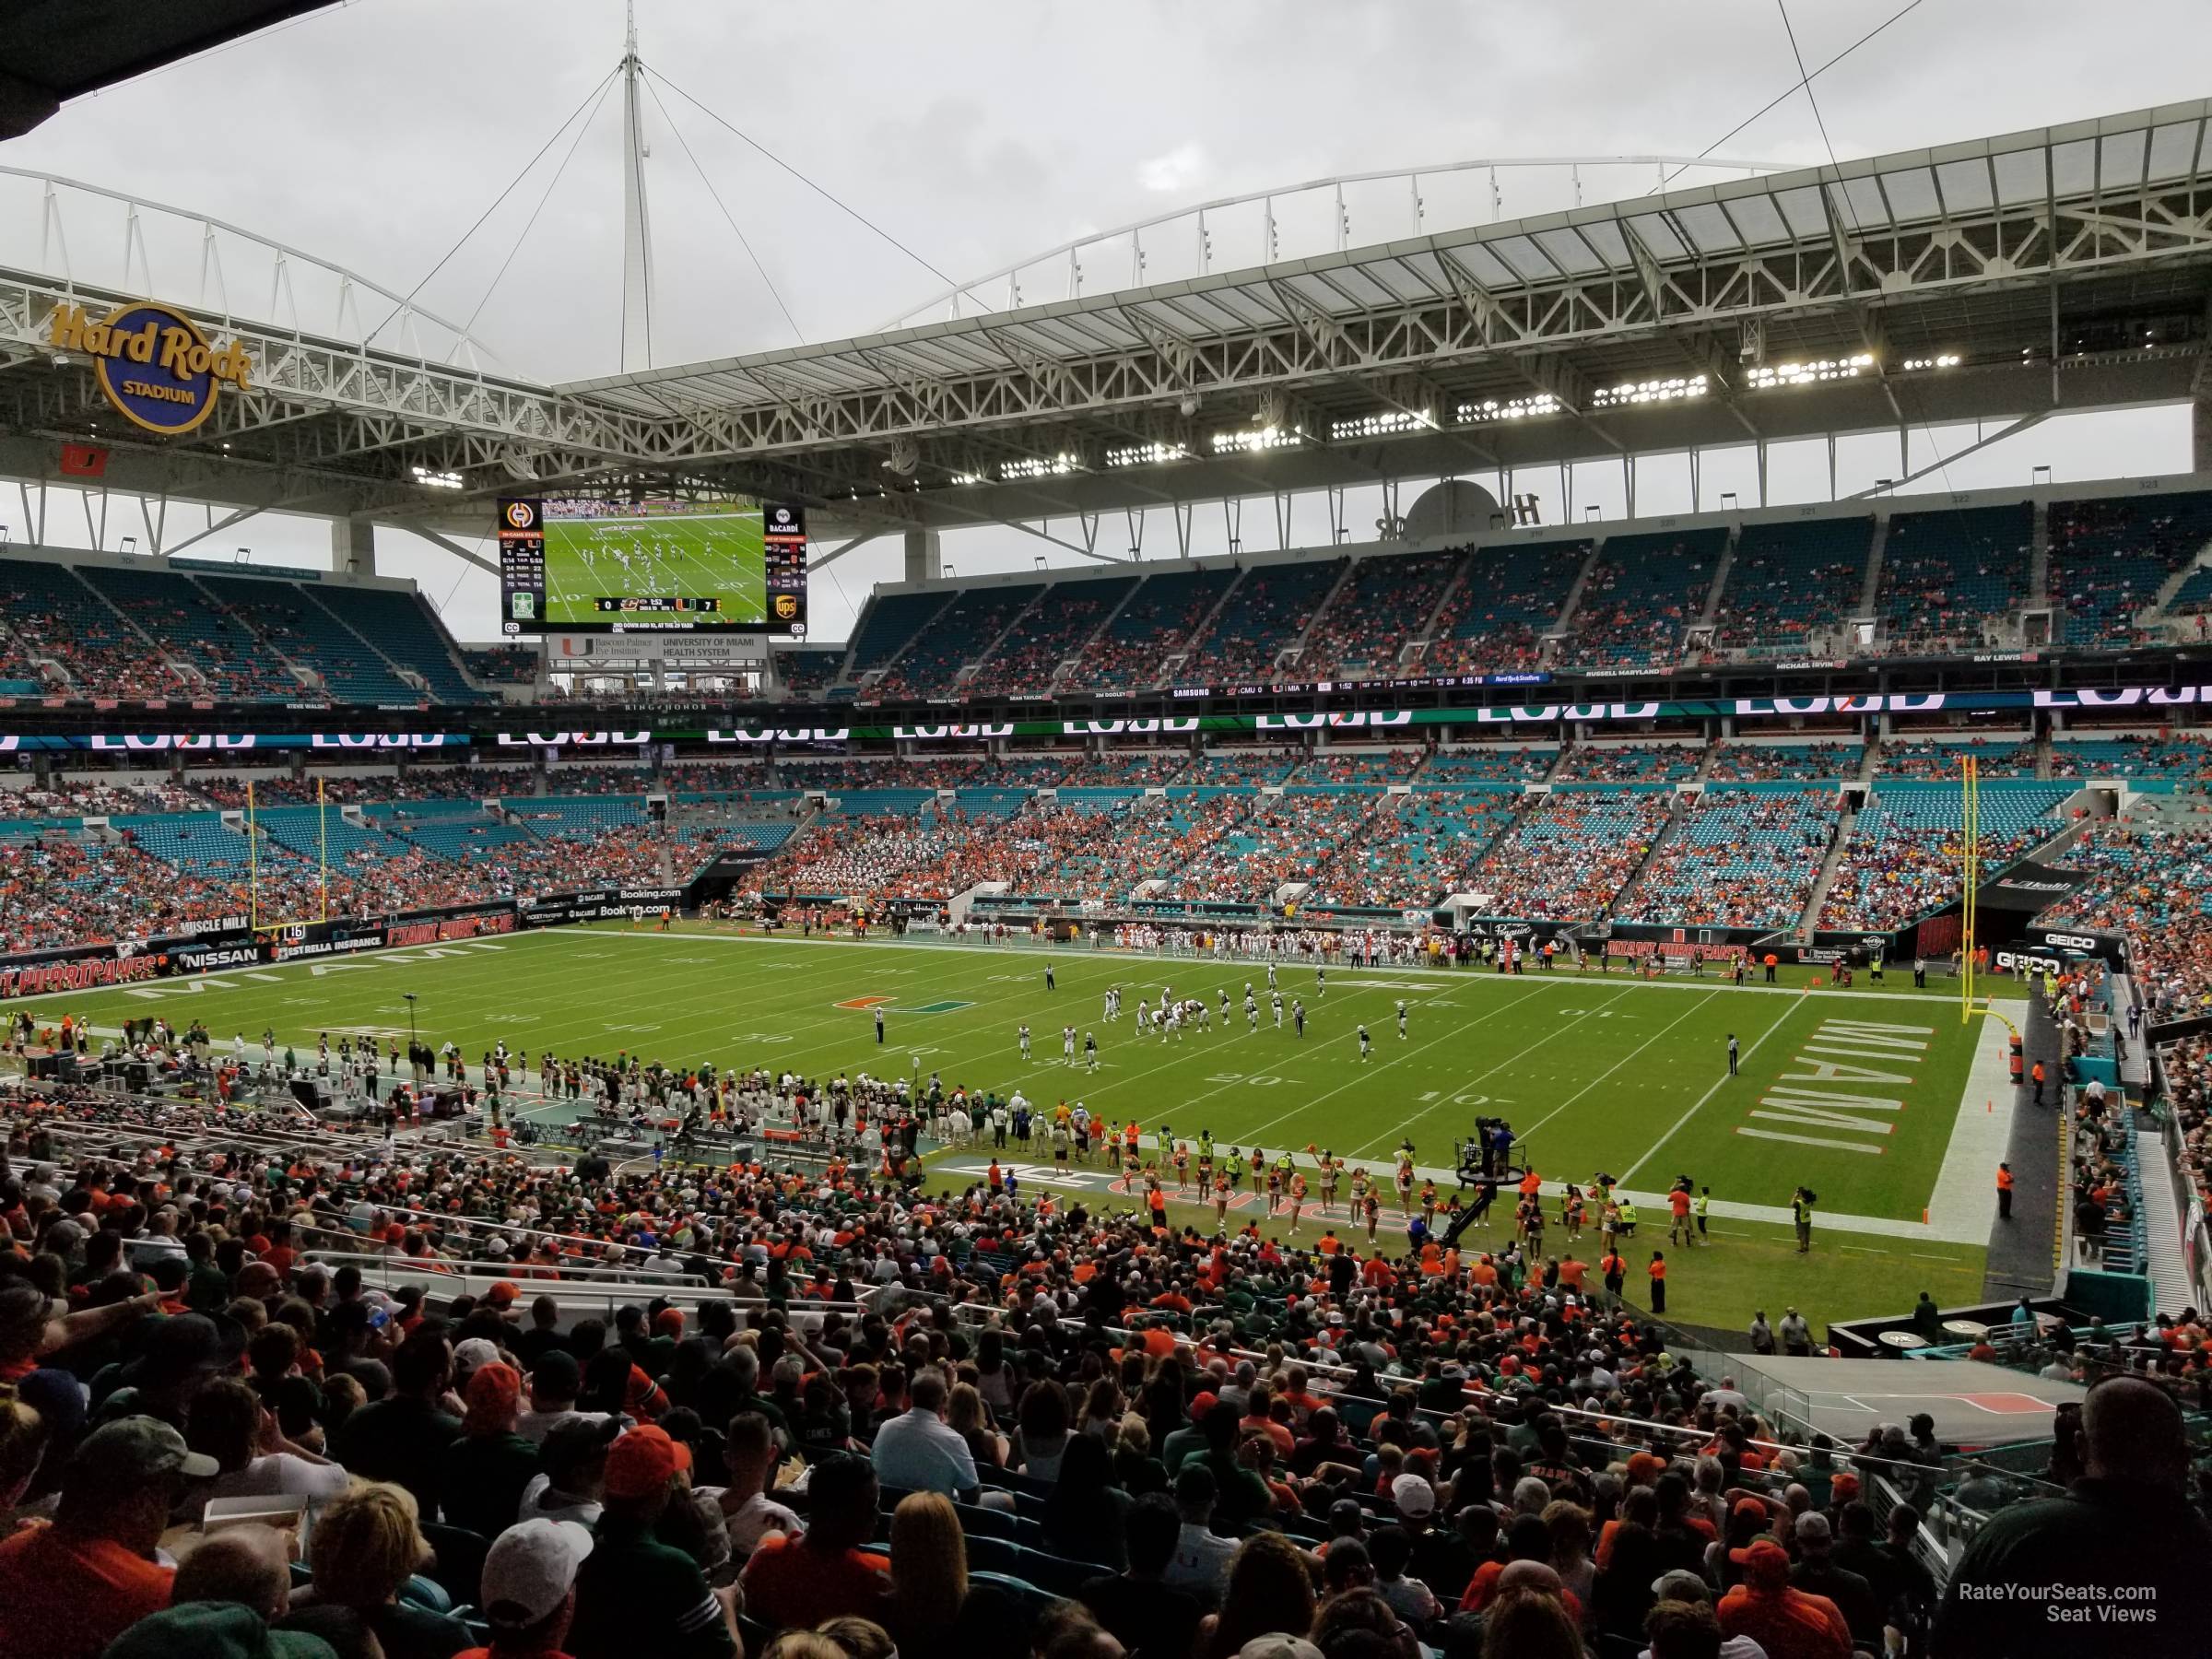 section 242, row 19 seat view  for football - hard rock stadium